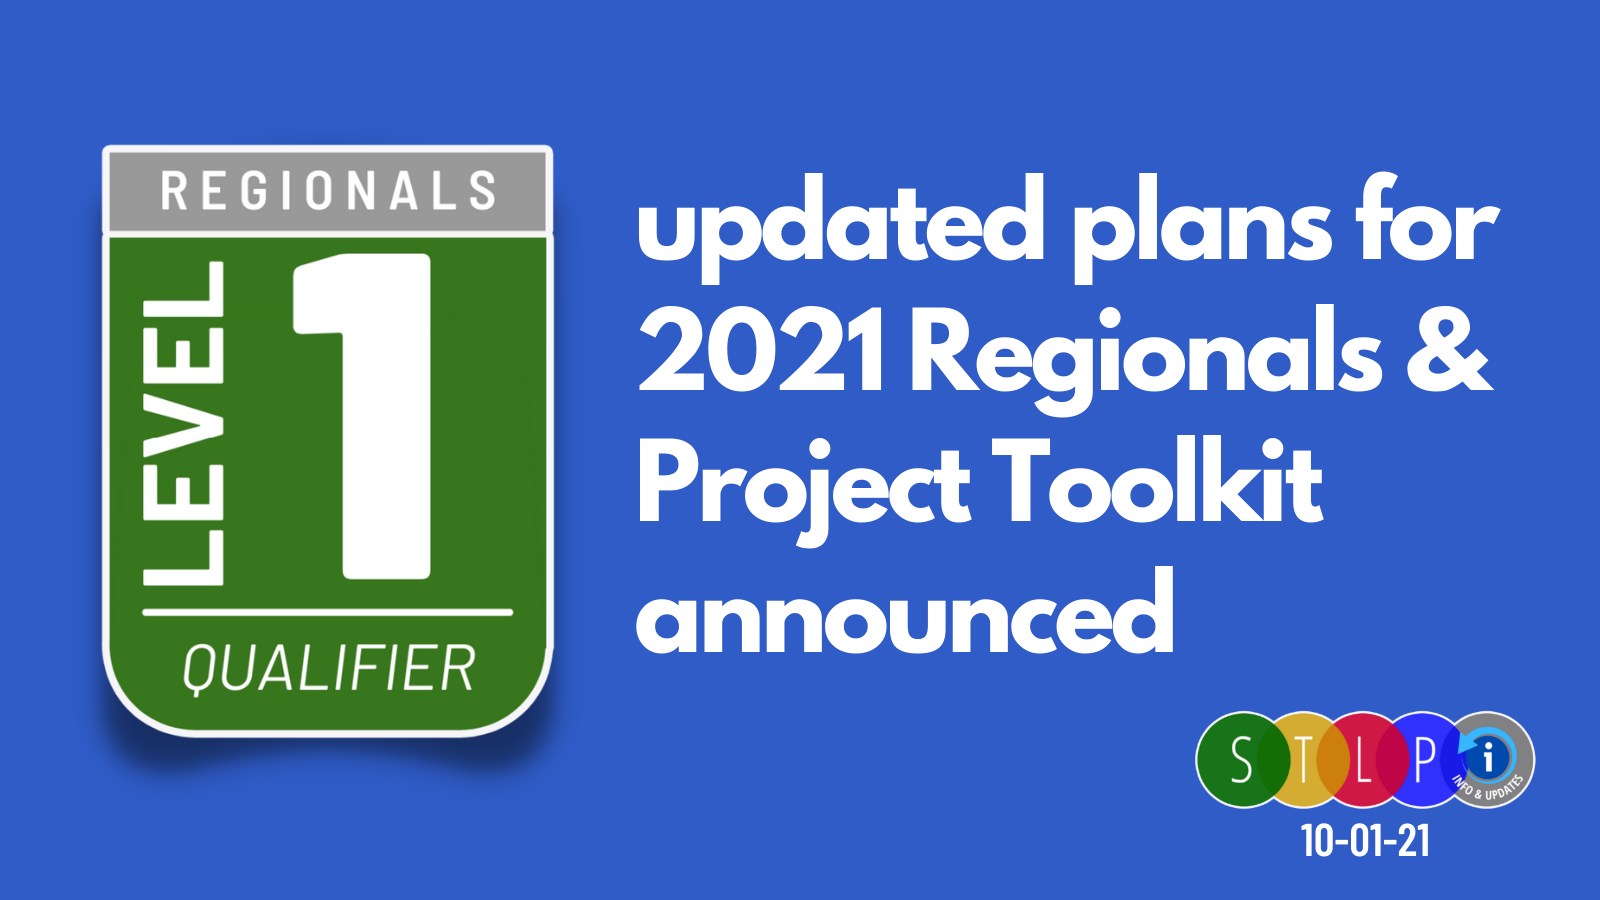 learn about updated plans for 2021 projects and regional events